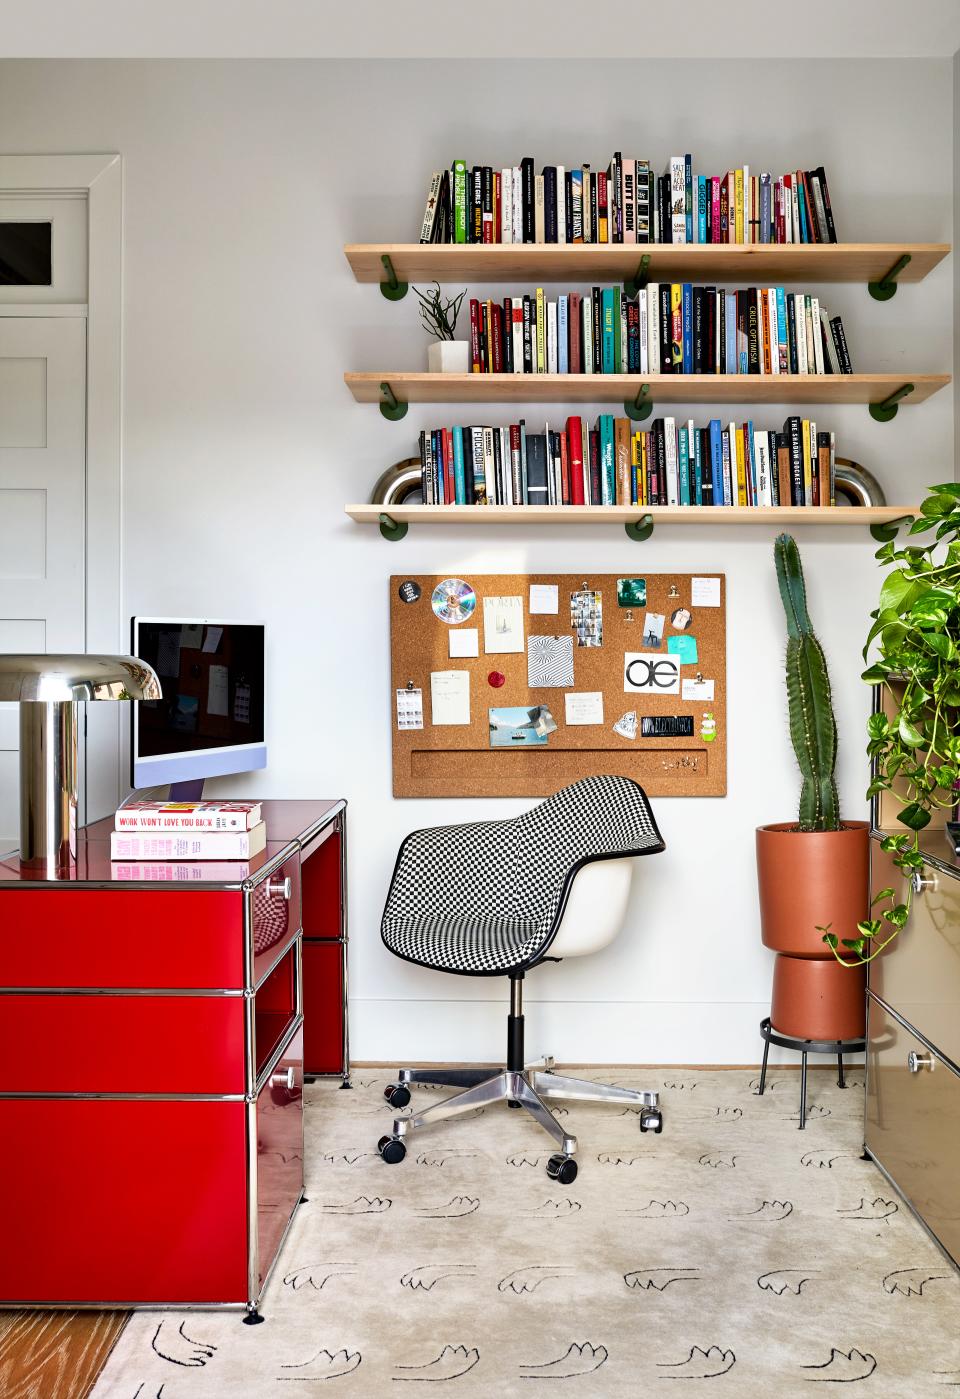 Zoë kept things simple in the study, with a Haller desk by USM, Design Within Reach’s Eames molded plastic task armchair, and Roderick maple wall shelves by Shelfology. An All Hands rug by Nordic Knots tames the hard-lined surroundings, while a Mushroom table lamp by HK Living lends a subtle sheen.